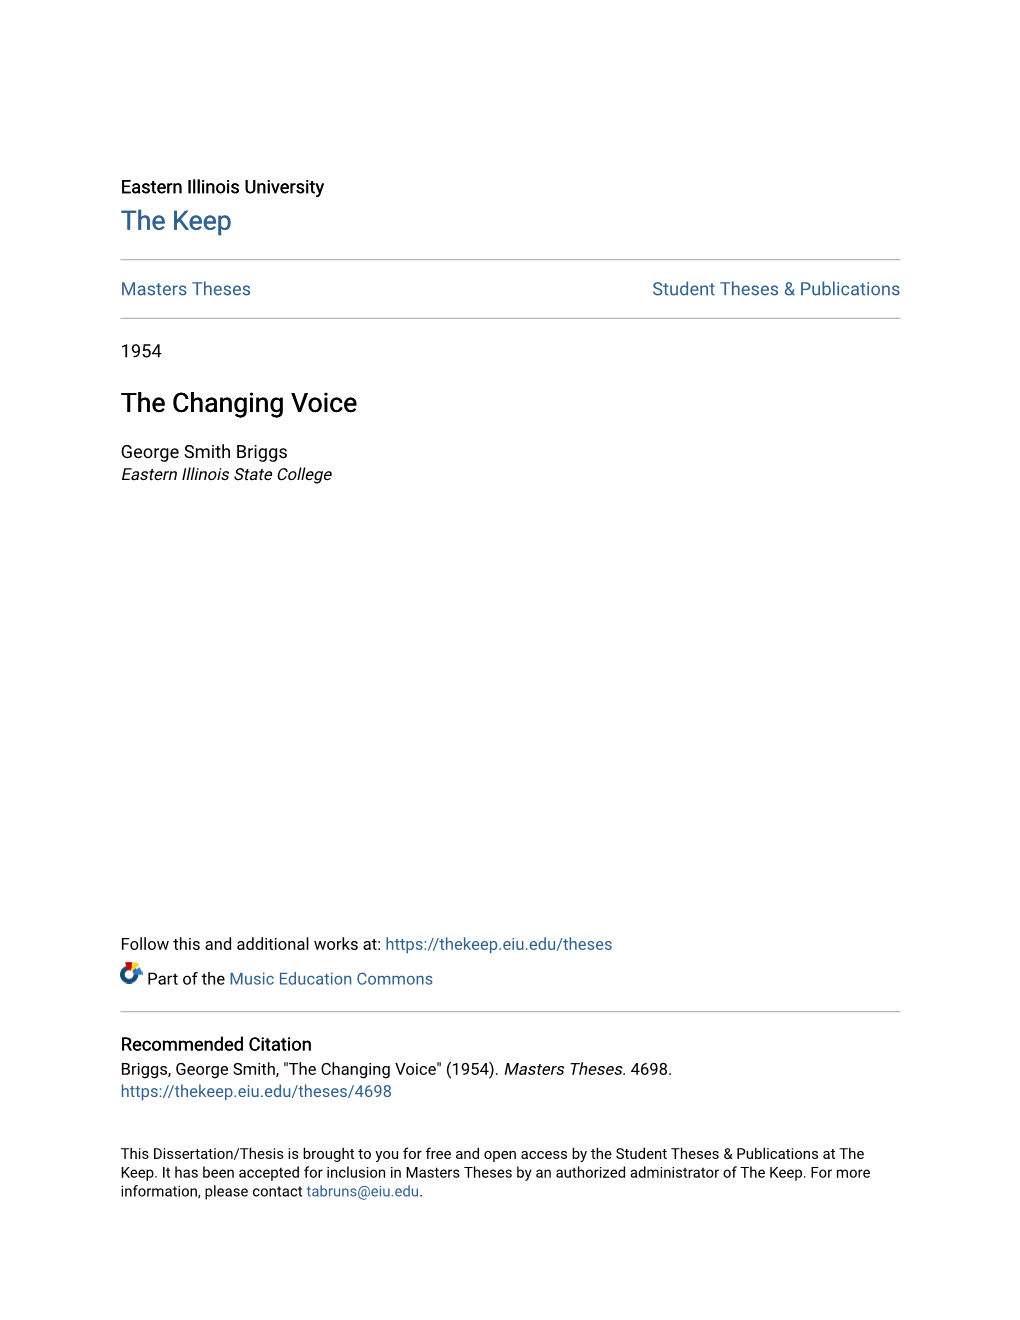 The Changing Voice